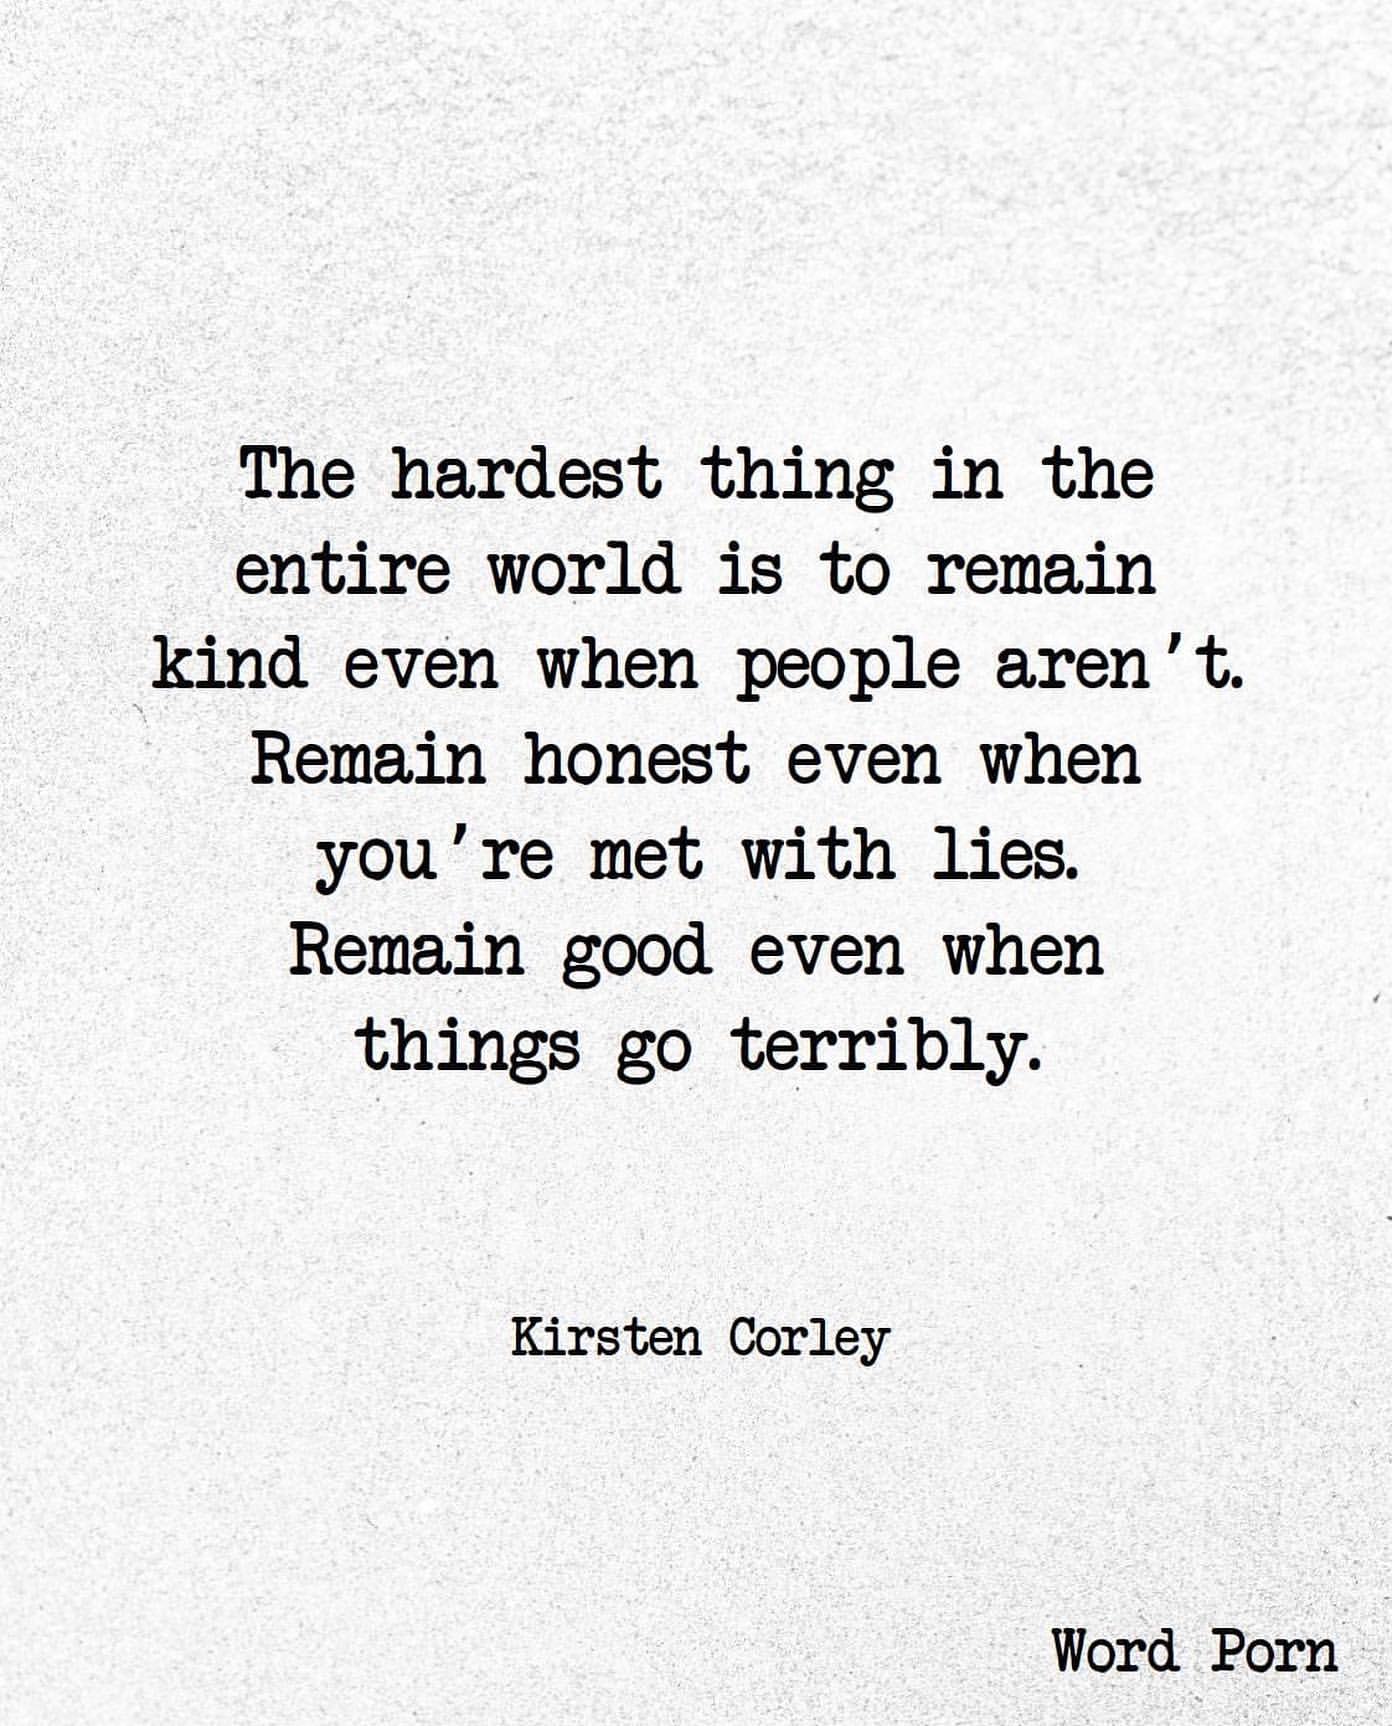 The hardest thing in the entire world is to remain kind even when people aren't. Remain honest even when you're met with lies. Remain good even when things go terribly. Kirsten Corley.